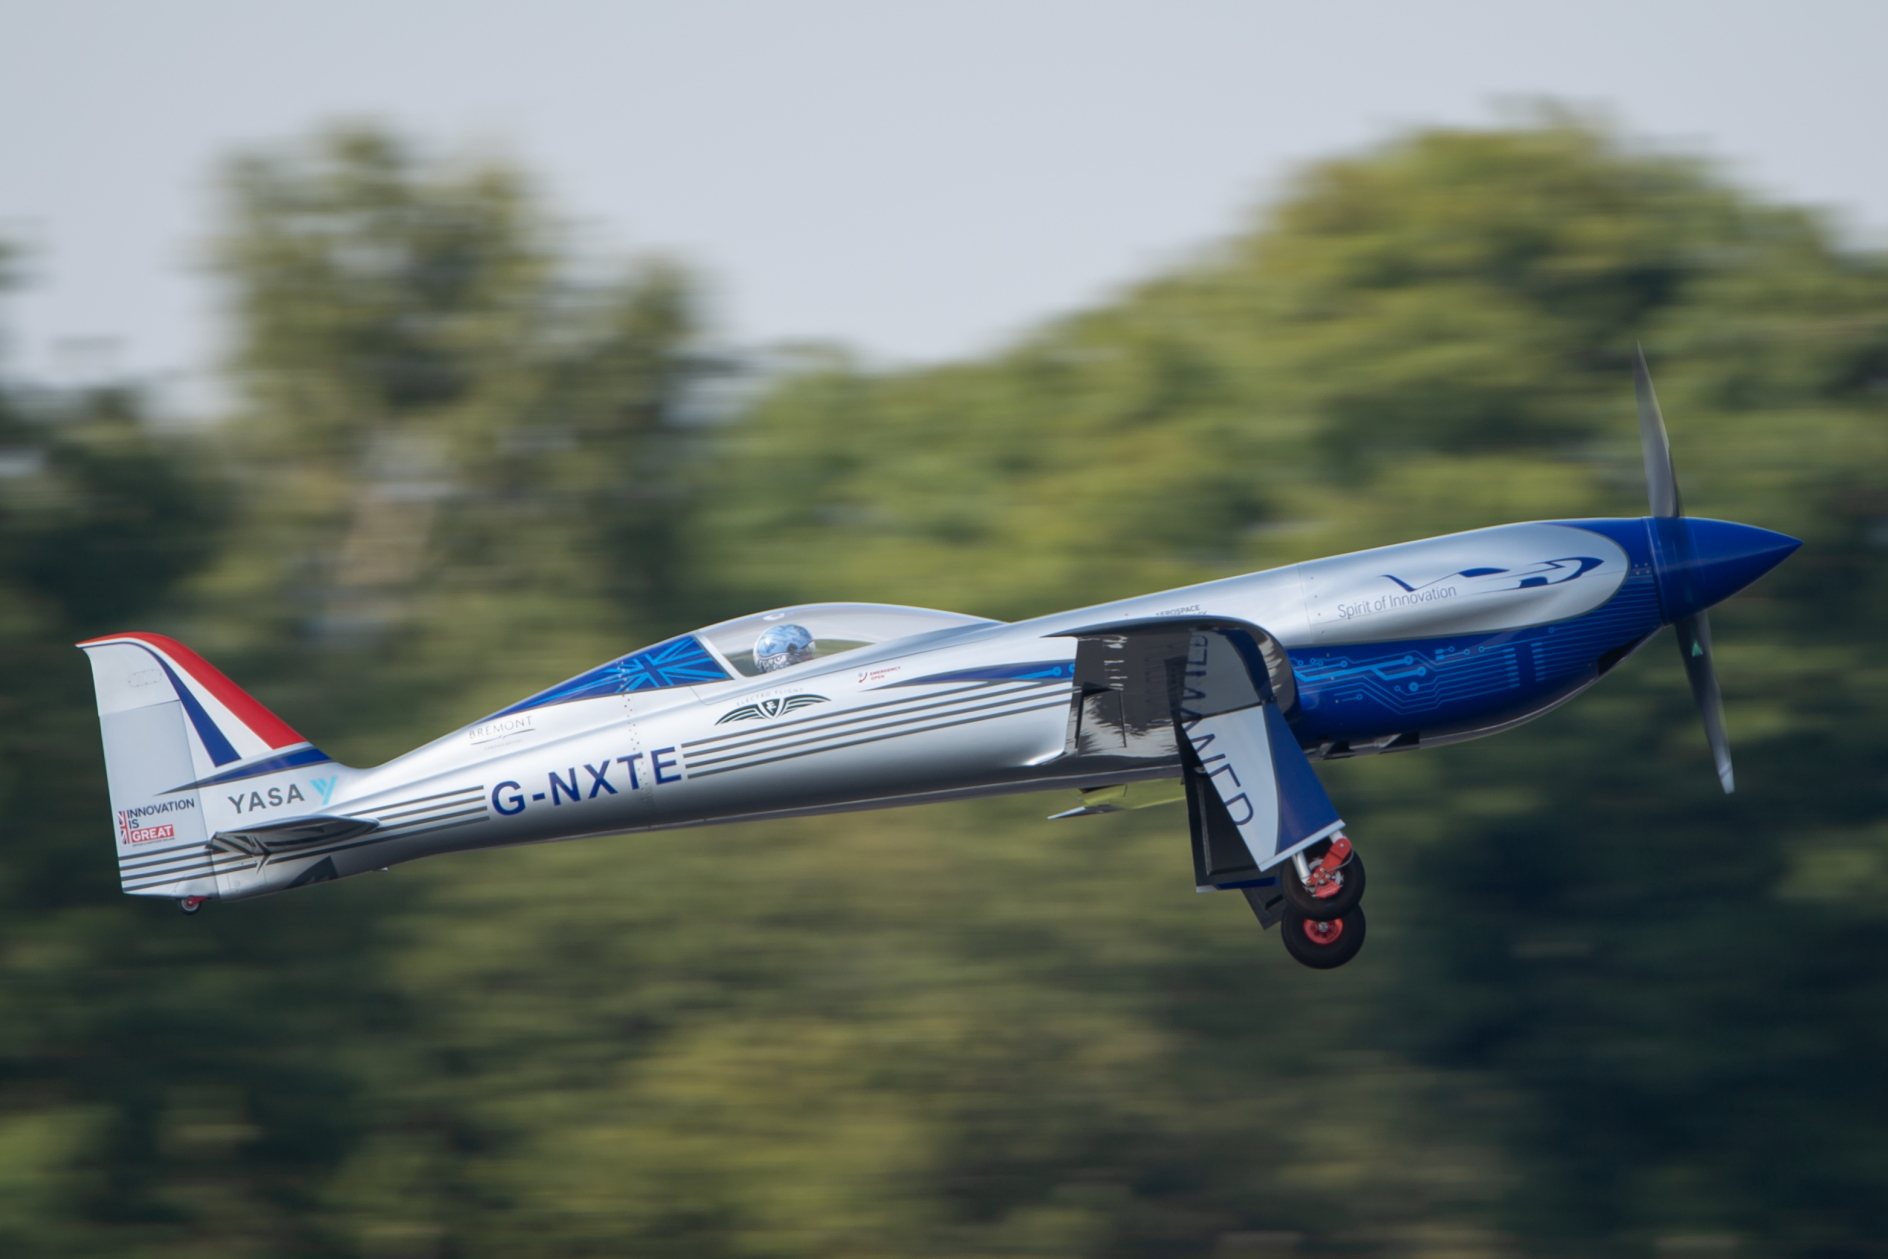 Rolls-Royce’s all-electric ‘Spirit of Innovation’ aircraft. Click to enlarge.